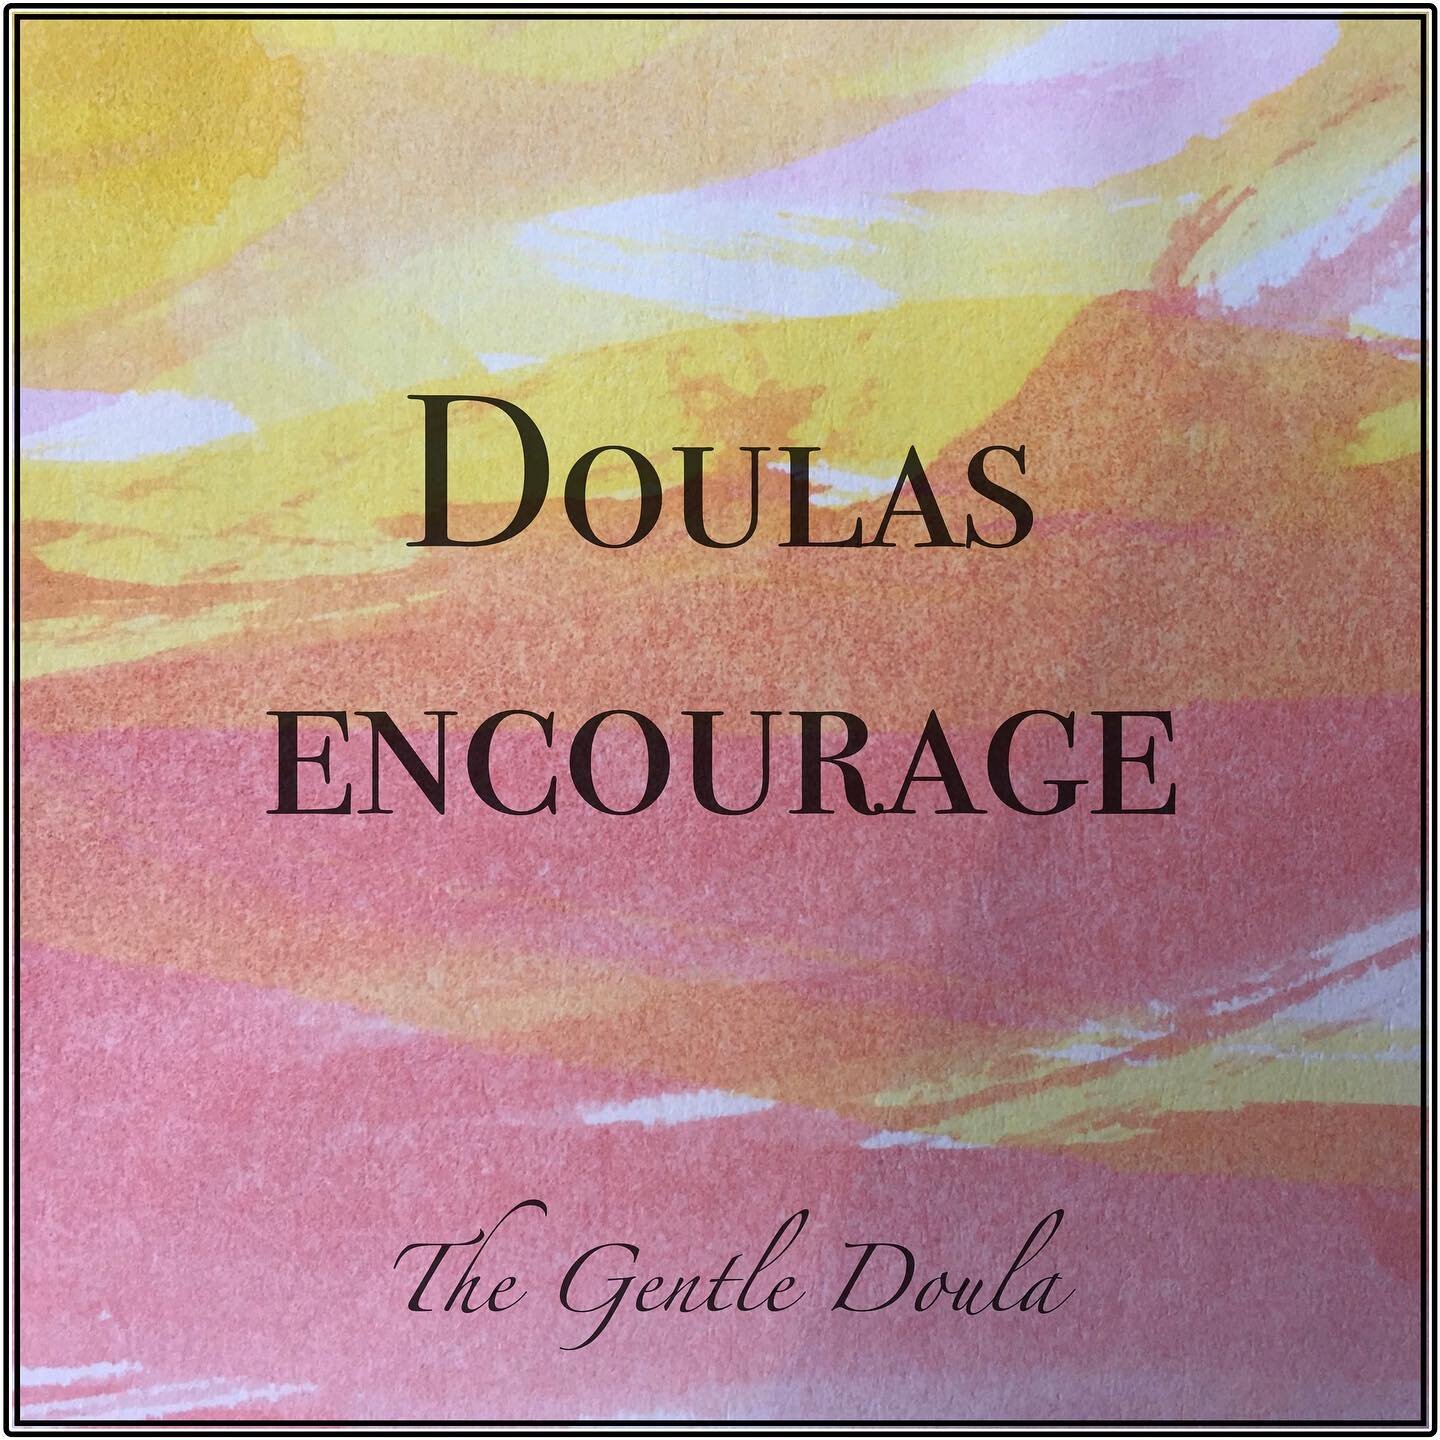 Doula support enCOURAGEs you! Personal. Relational. Caring. Continuous. Doulas come alongside you and give you the courage to find your way, to find your voice, to find your strength. 
.
When you are giving birth at home: courage. 
.
When you are giv